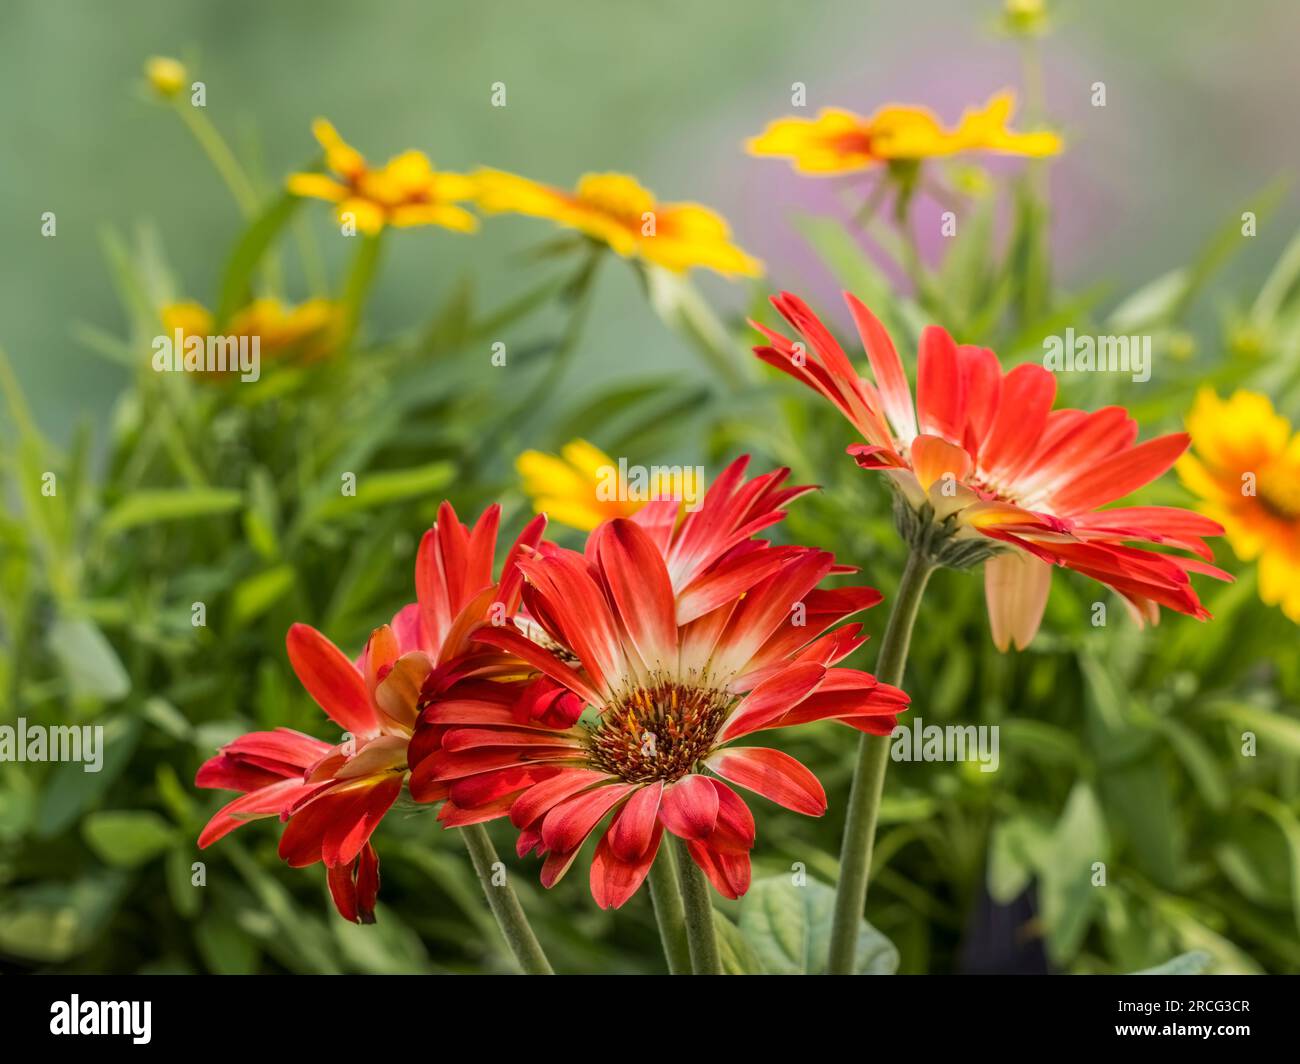 Close up of red Gerbera daisy flowers Stock Photo